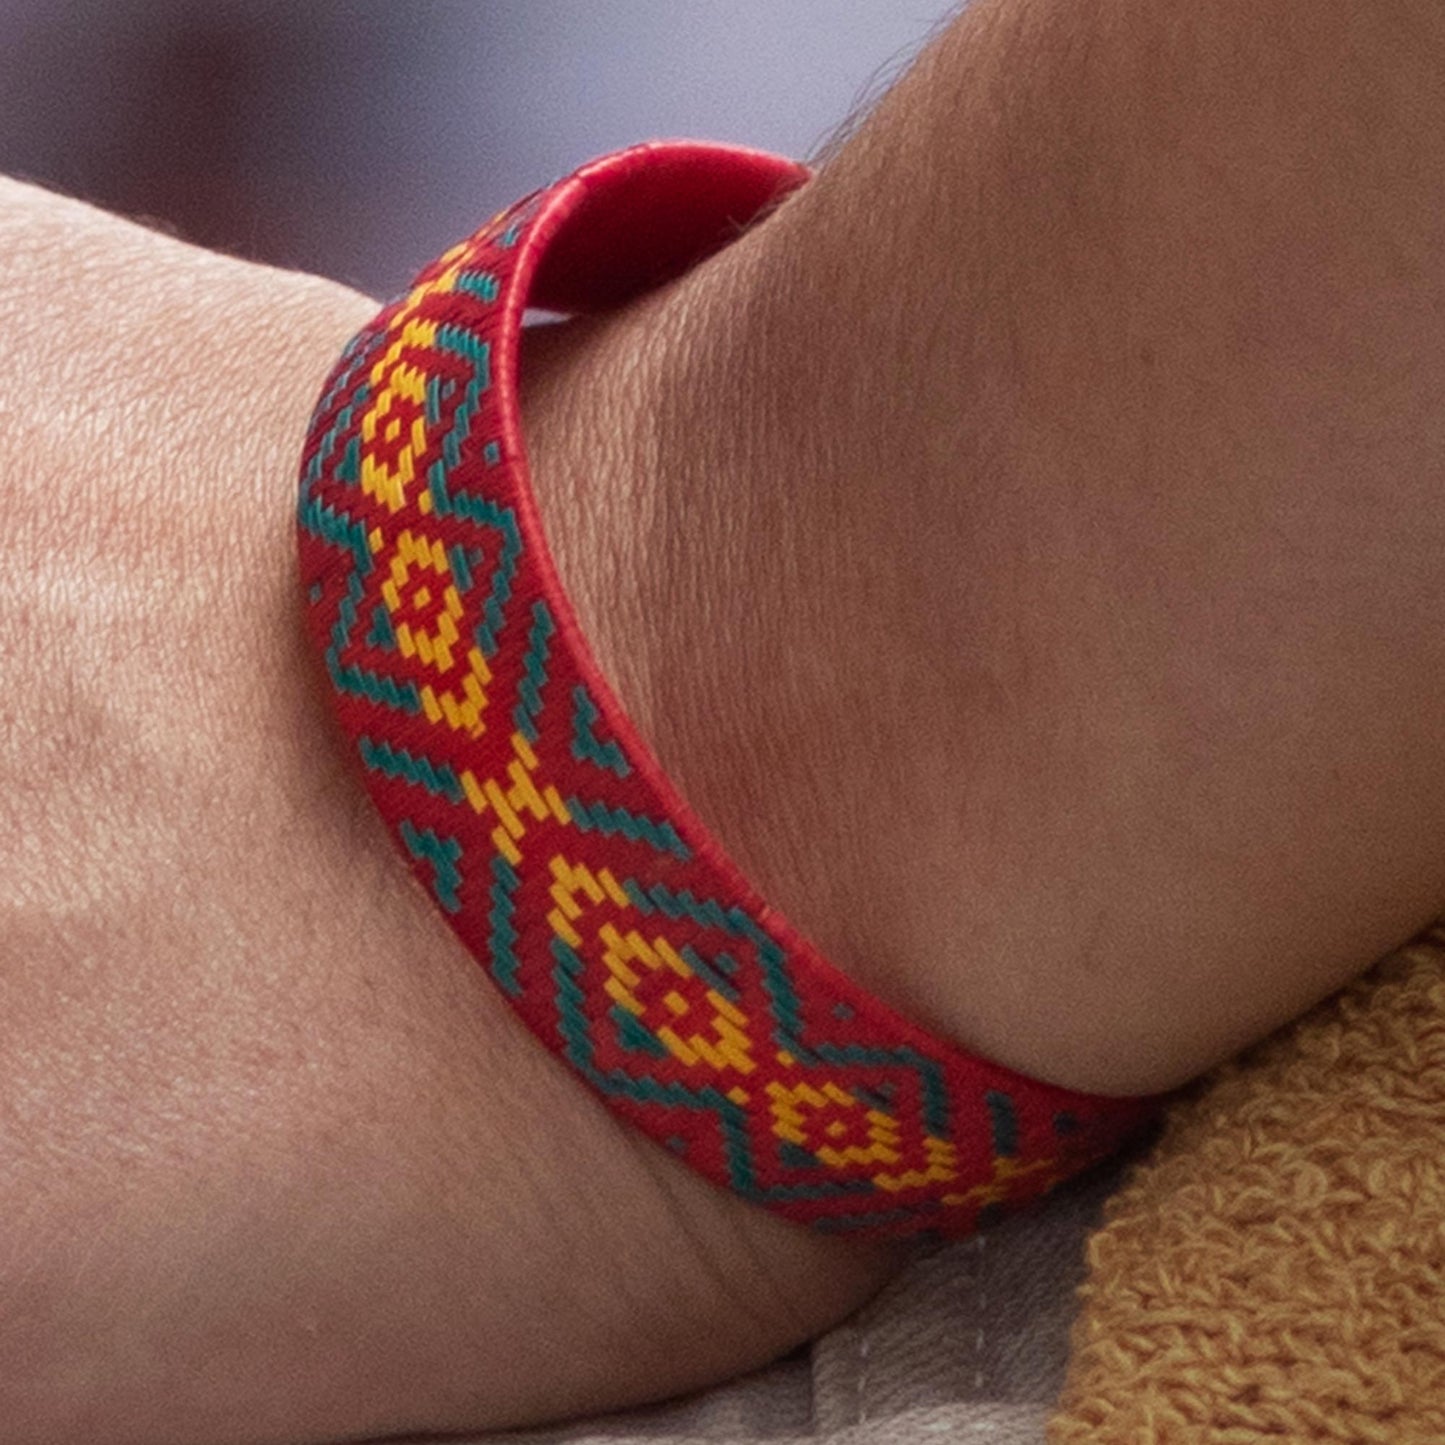 Deep River Handcrafted Bangle Bracelet from Colombia